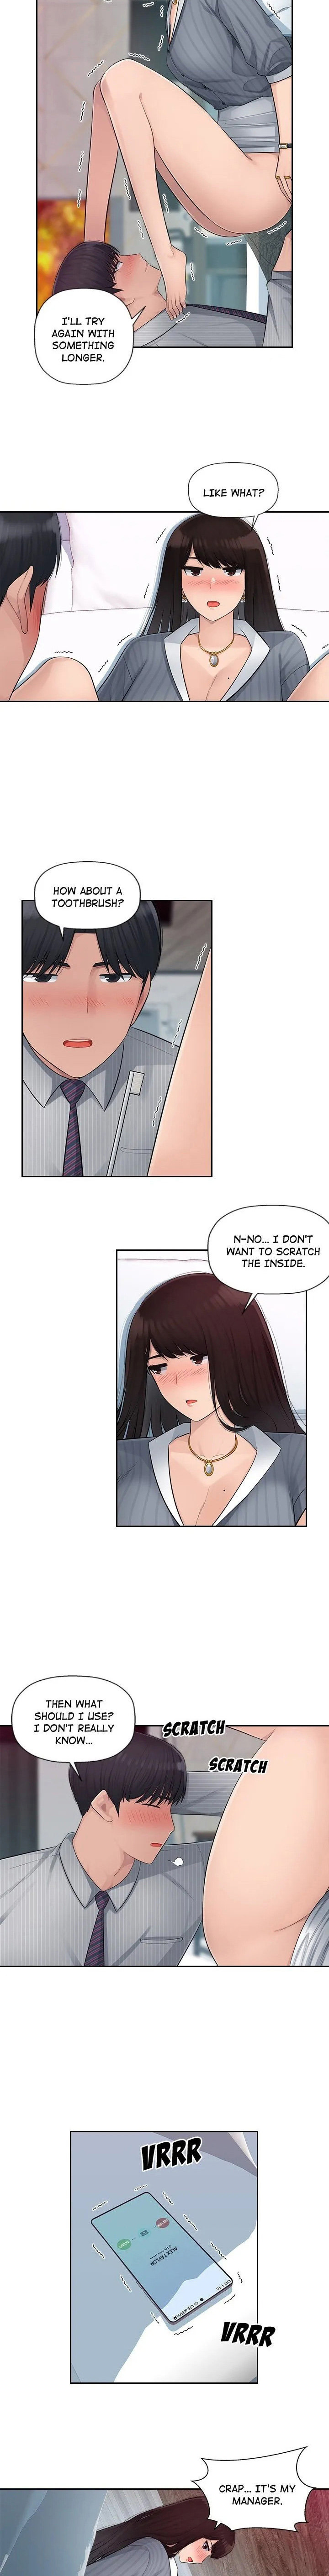 Office Desires - Chapter 3 Page 3